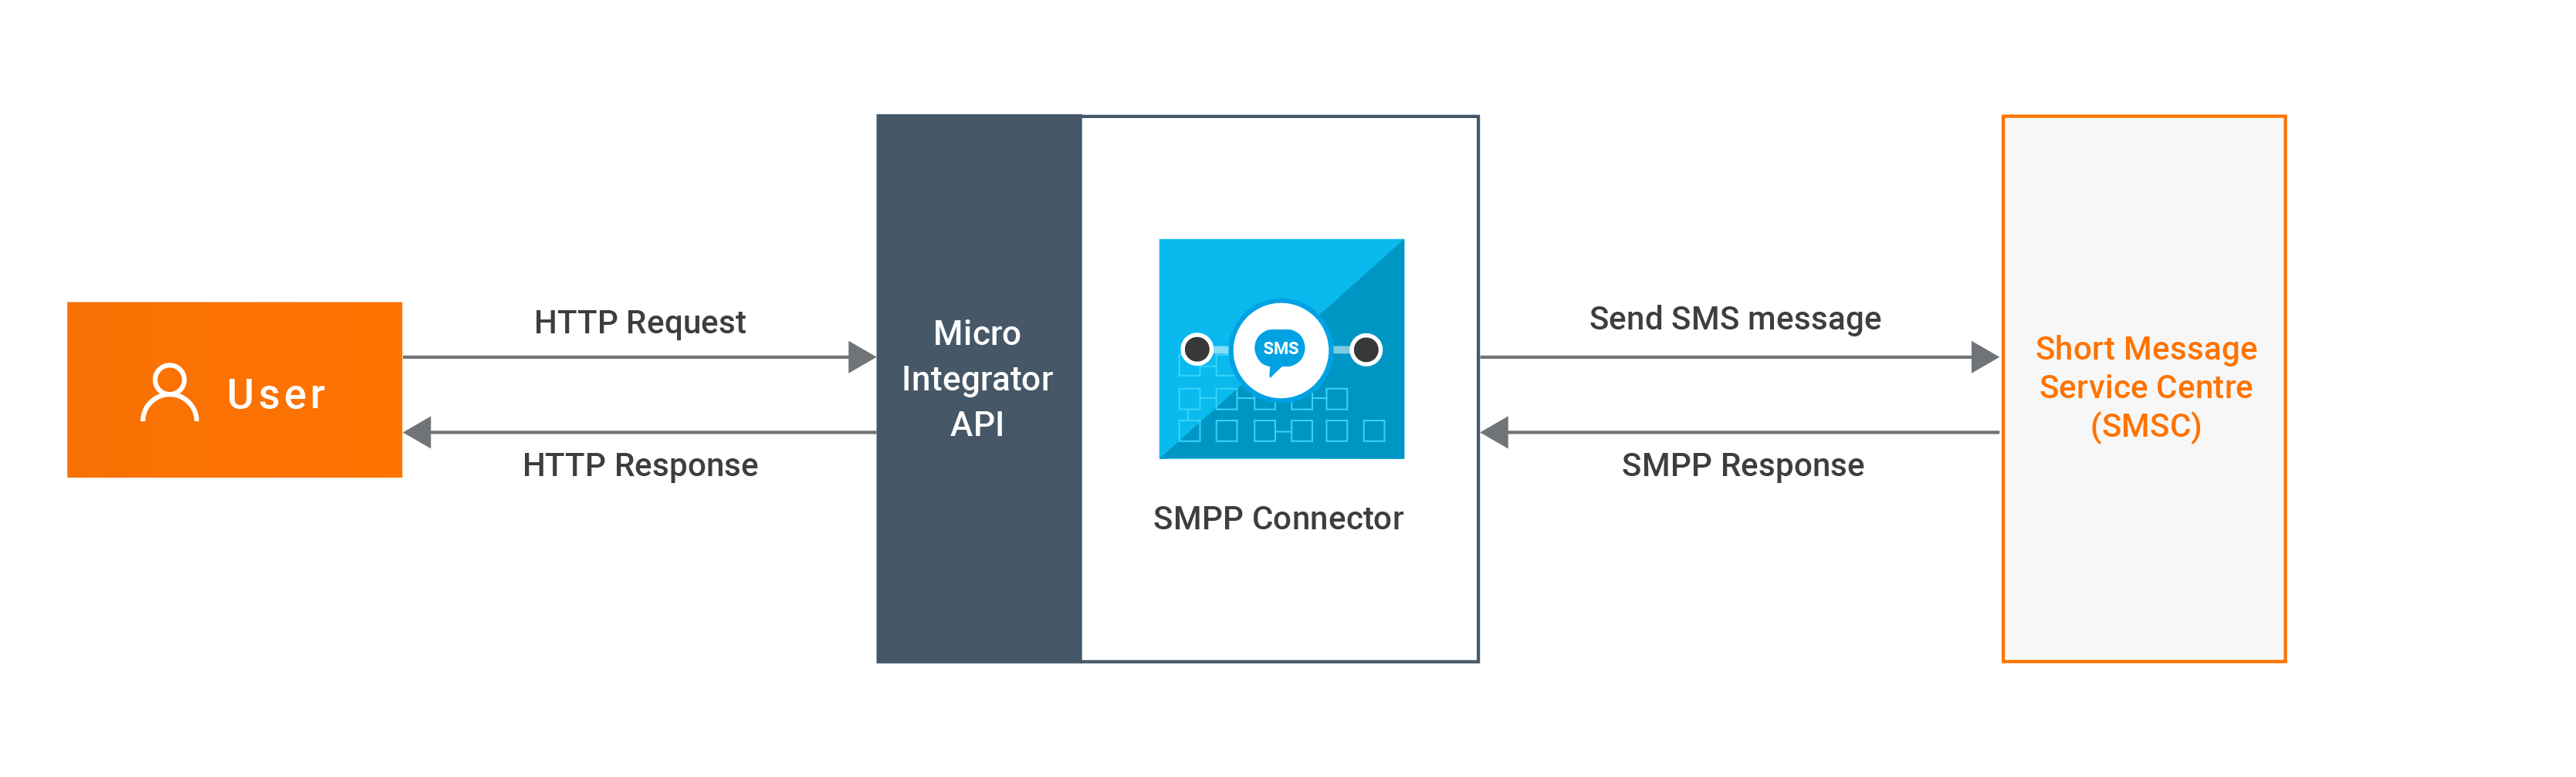 smpp connector example